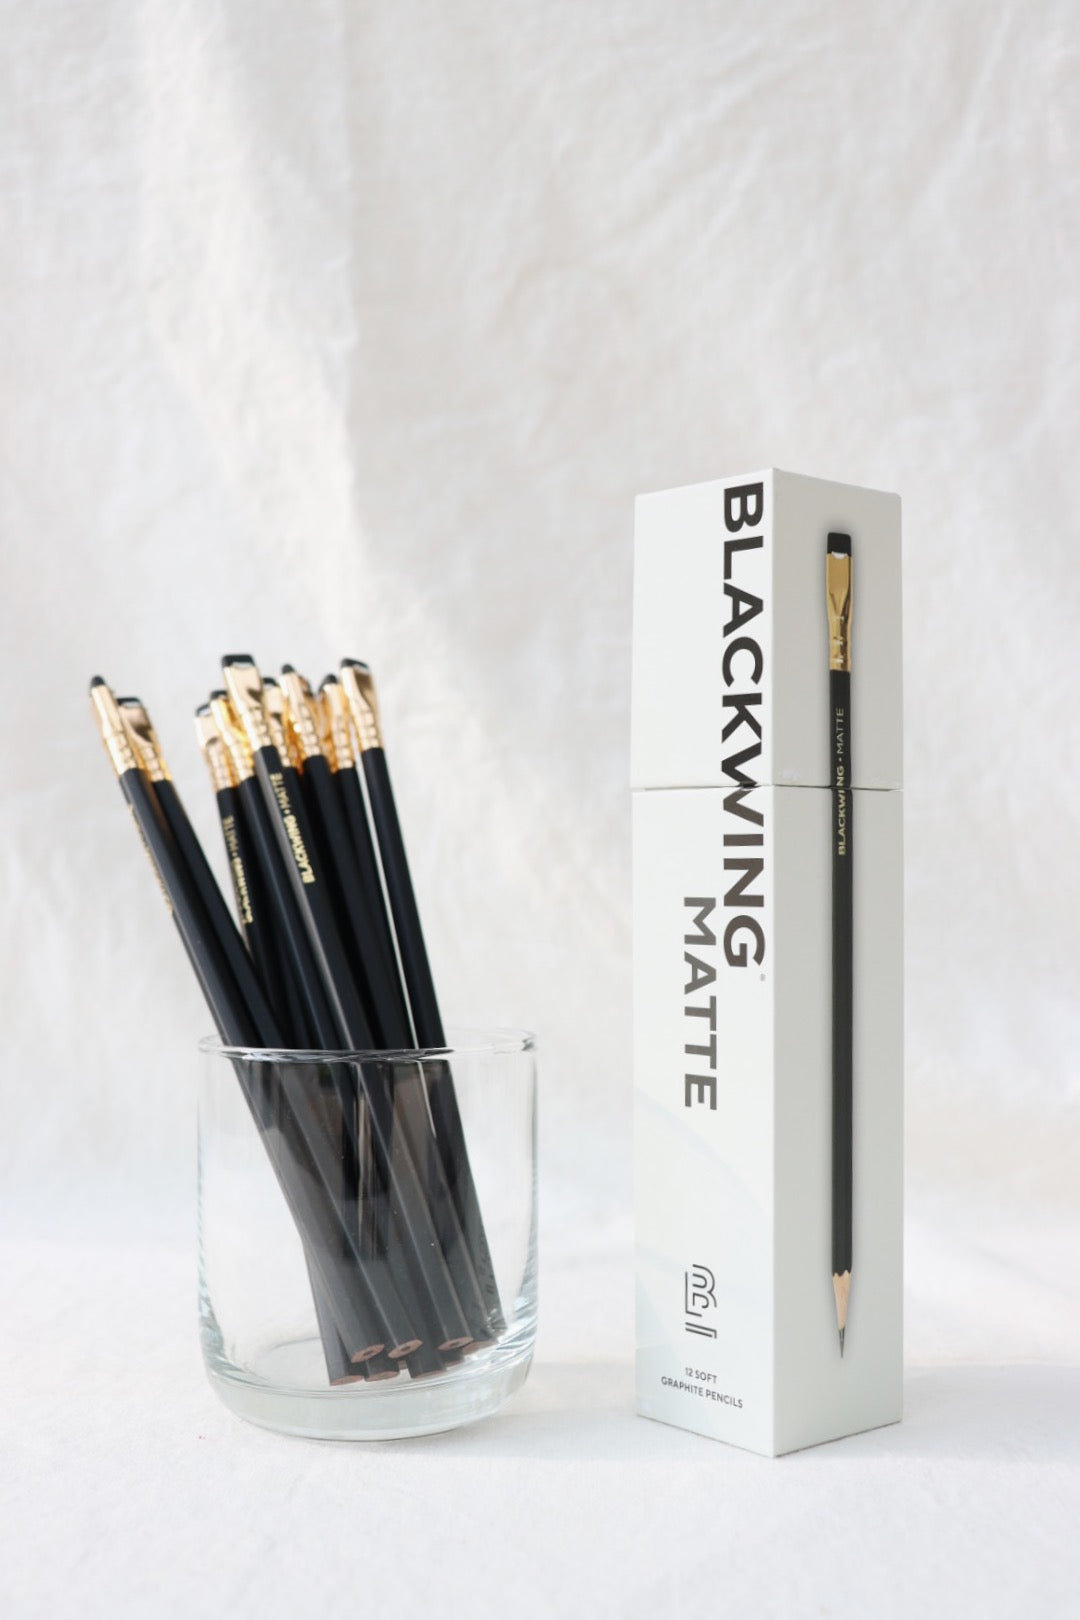 Boxed Blackwing Matte